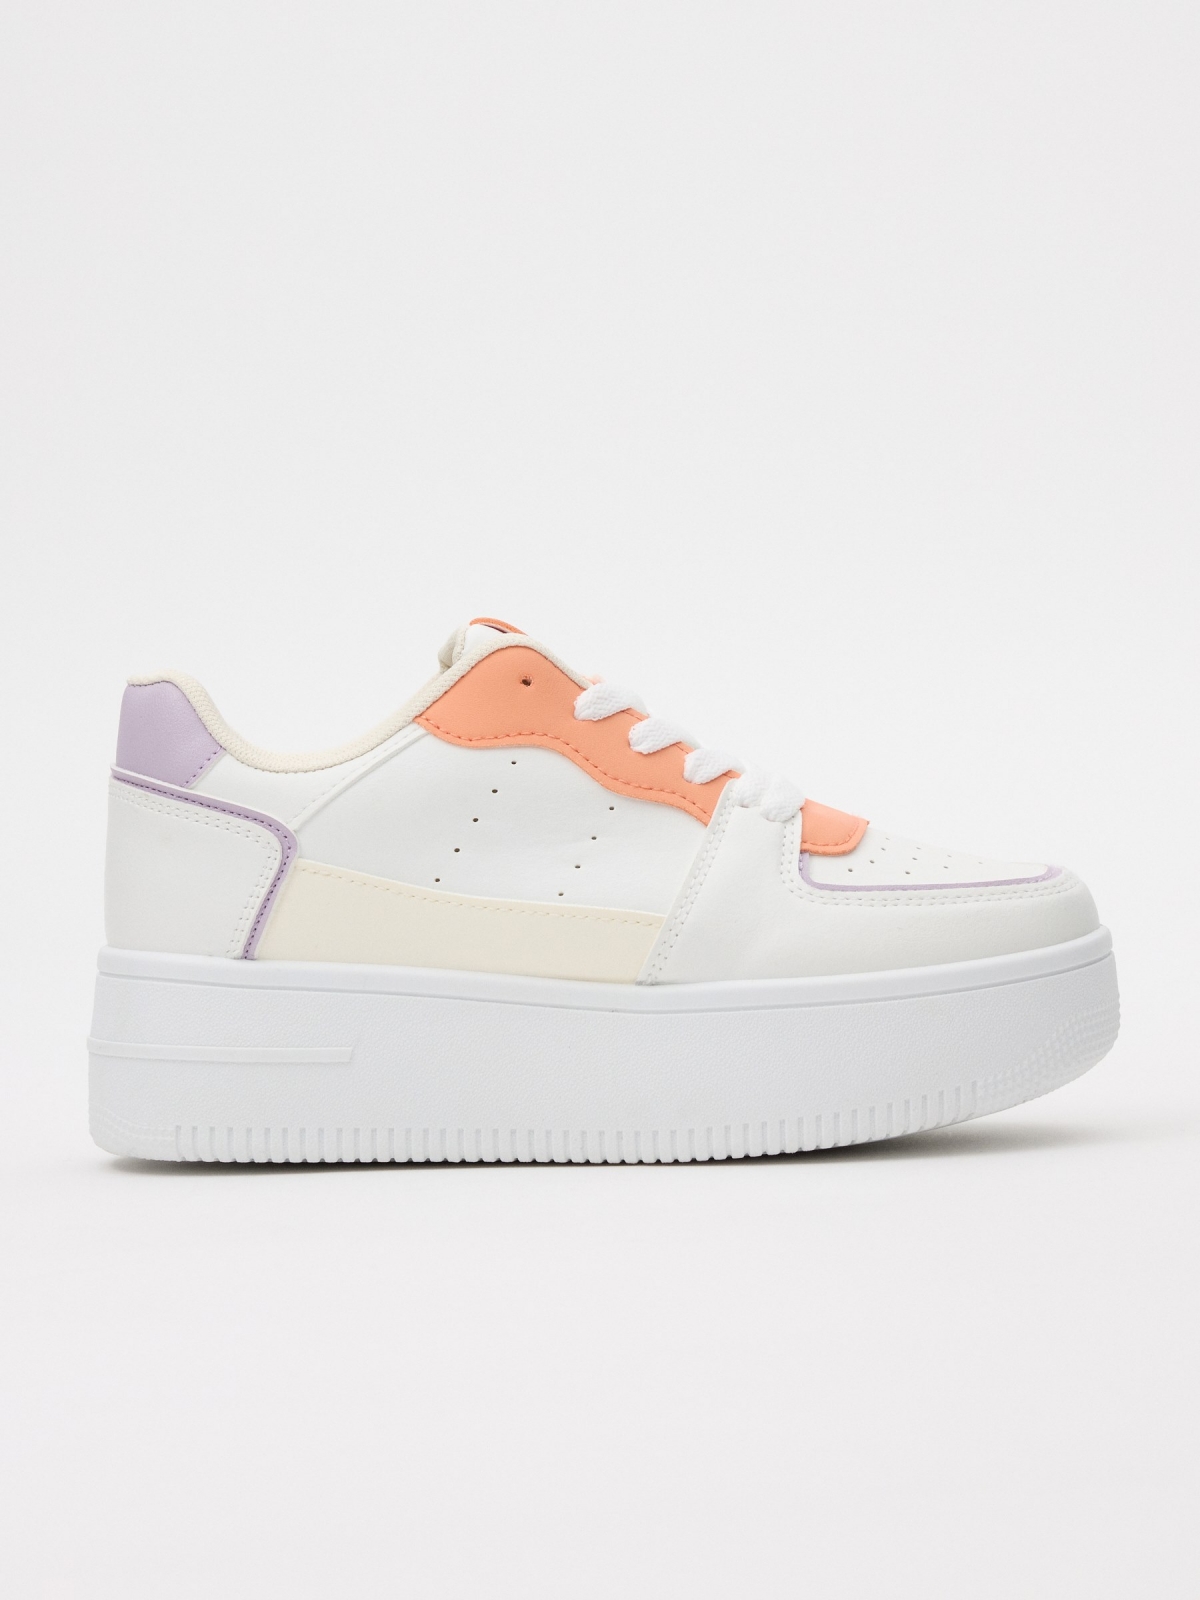 Casual colorful sneaker with platform white